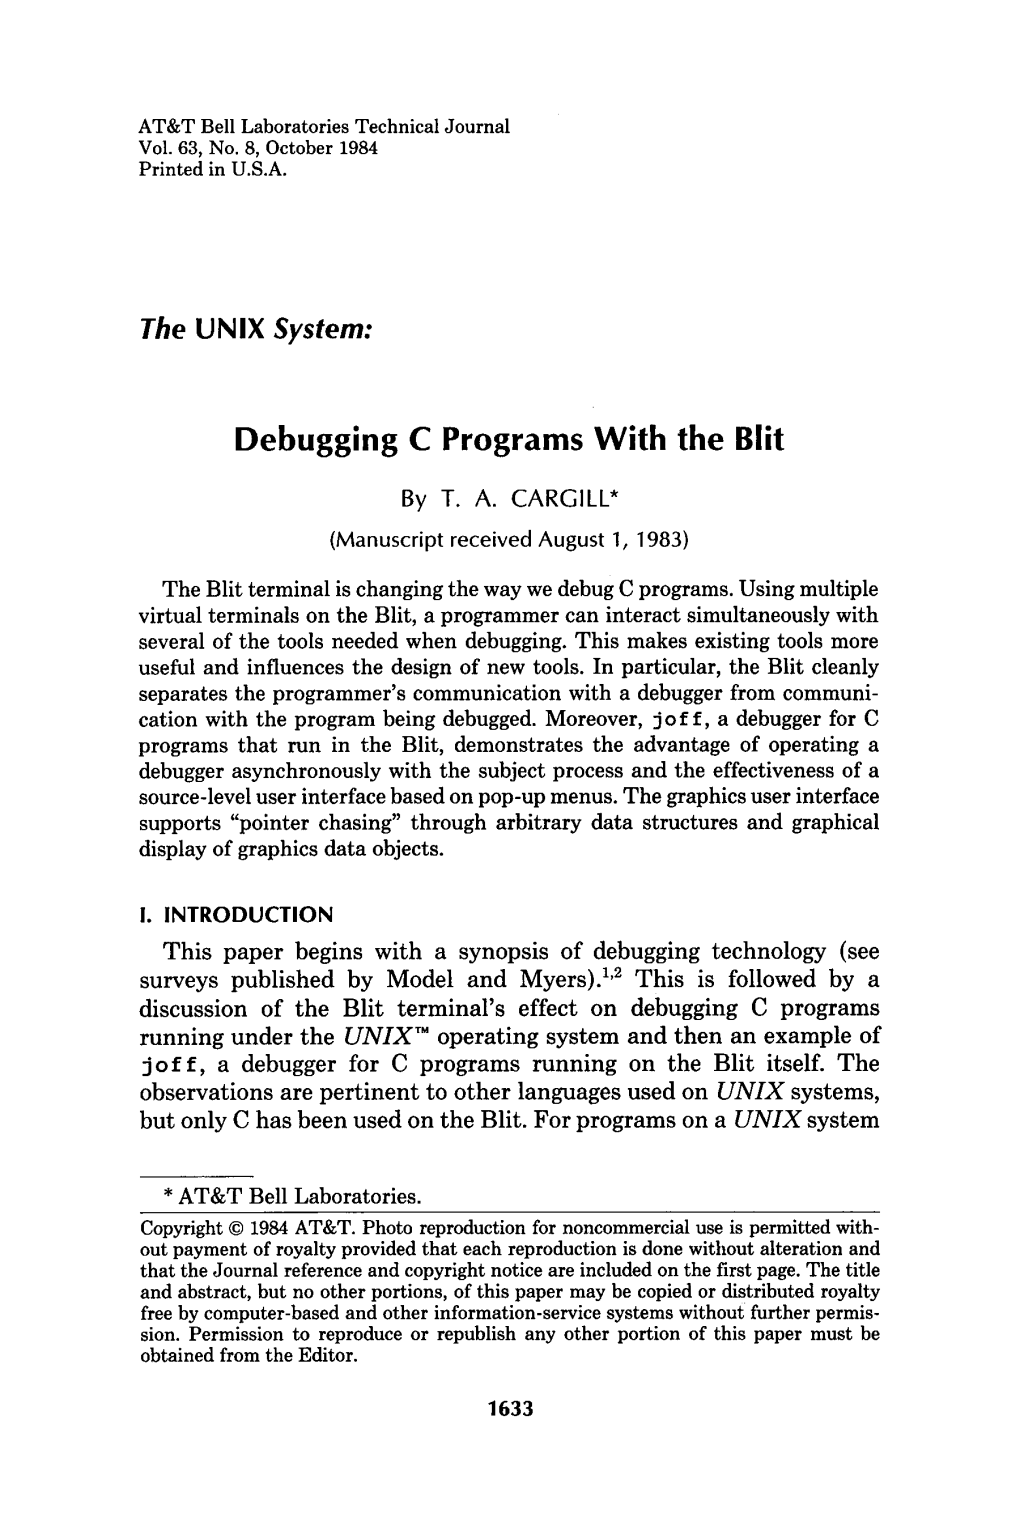 The UNIX System: Debugging C Programs with the Blit